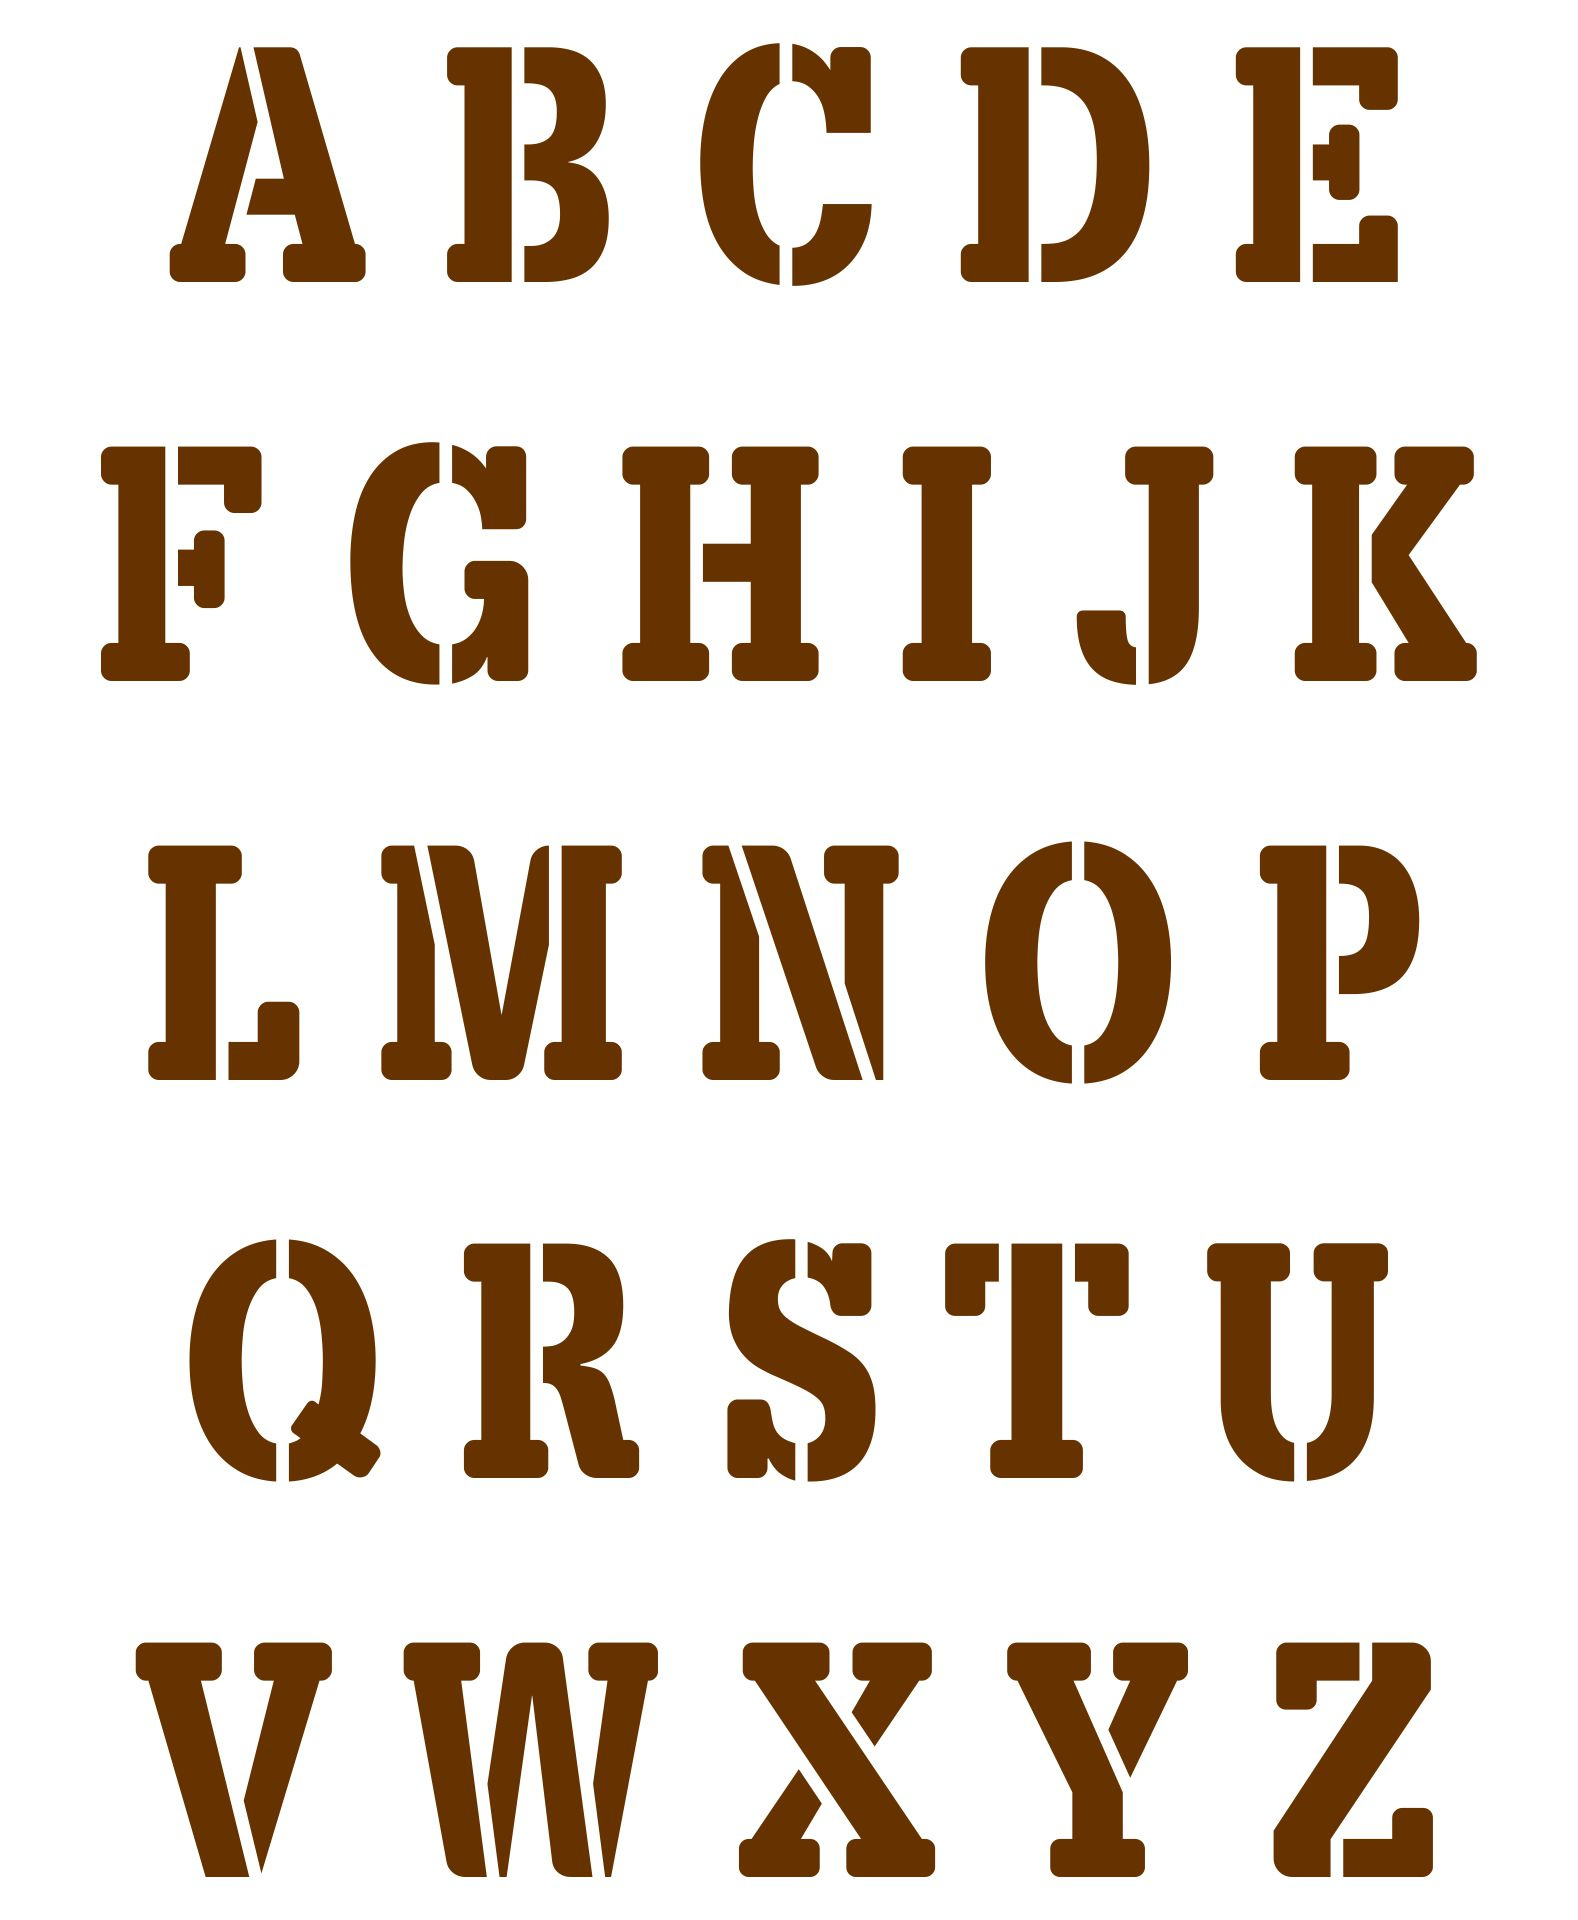 Free Printable Cut Out Alphabet Letters Pin On Stuff